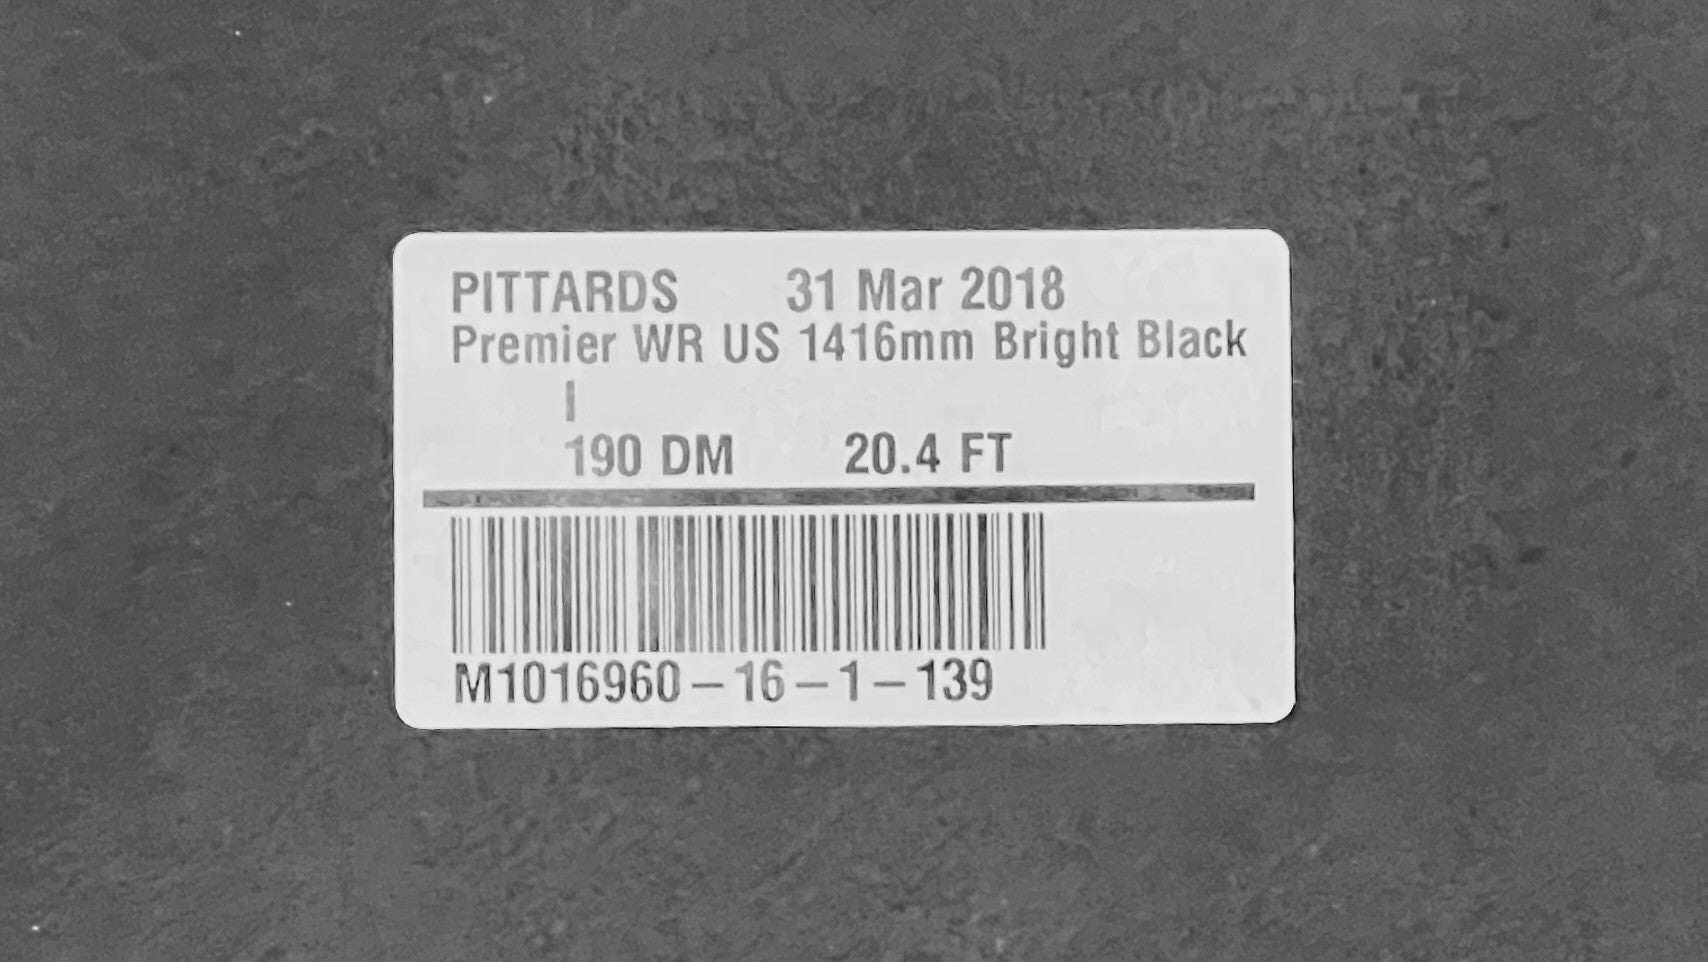 Premier Bright Black, Firm Printed Grain Leather Cow Side : 1.4-1.6mm (Ex Pittards Stock)